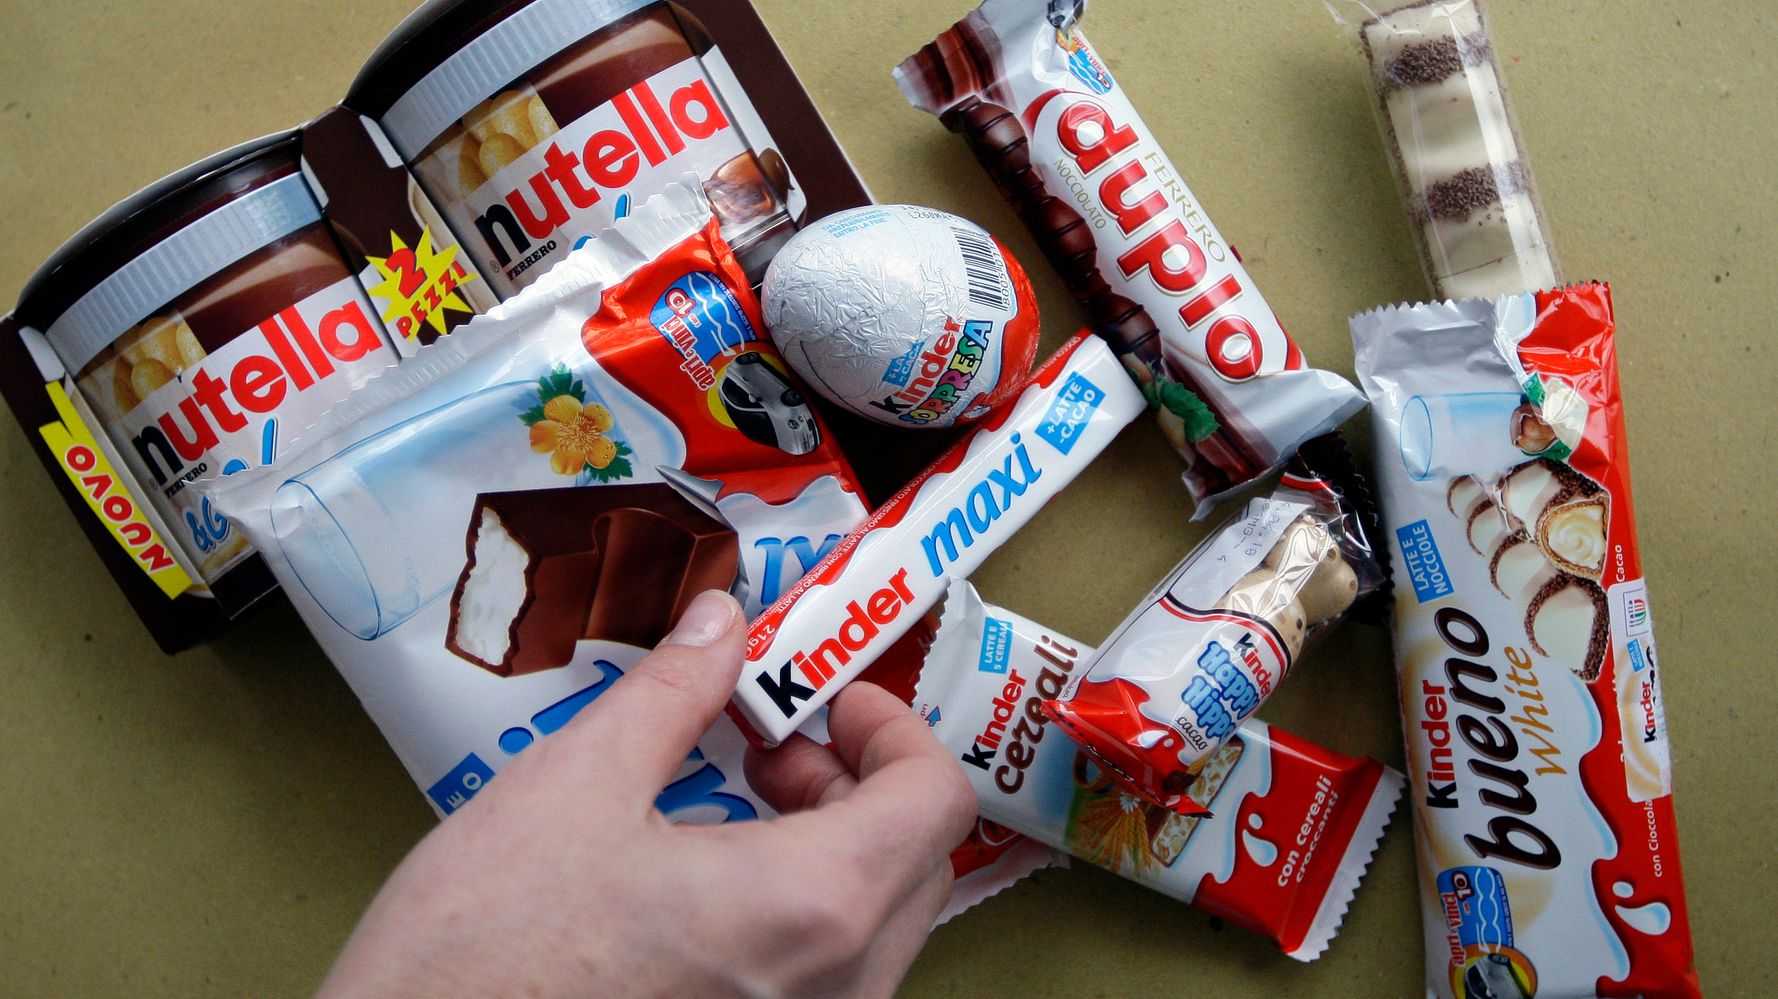 Kinder Ads Banned Online Amid Concerns About Rising Child ...